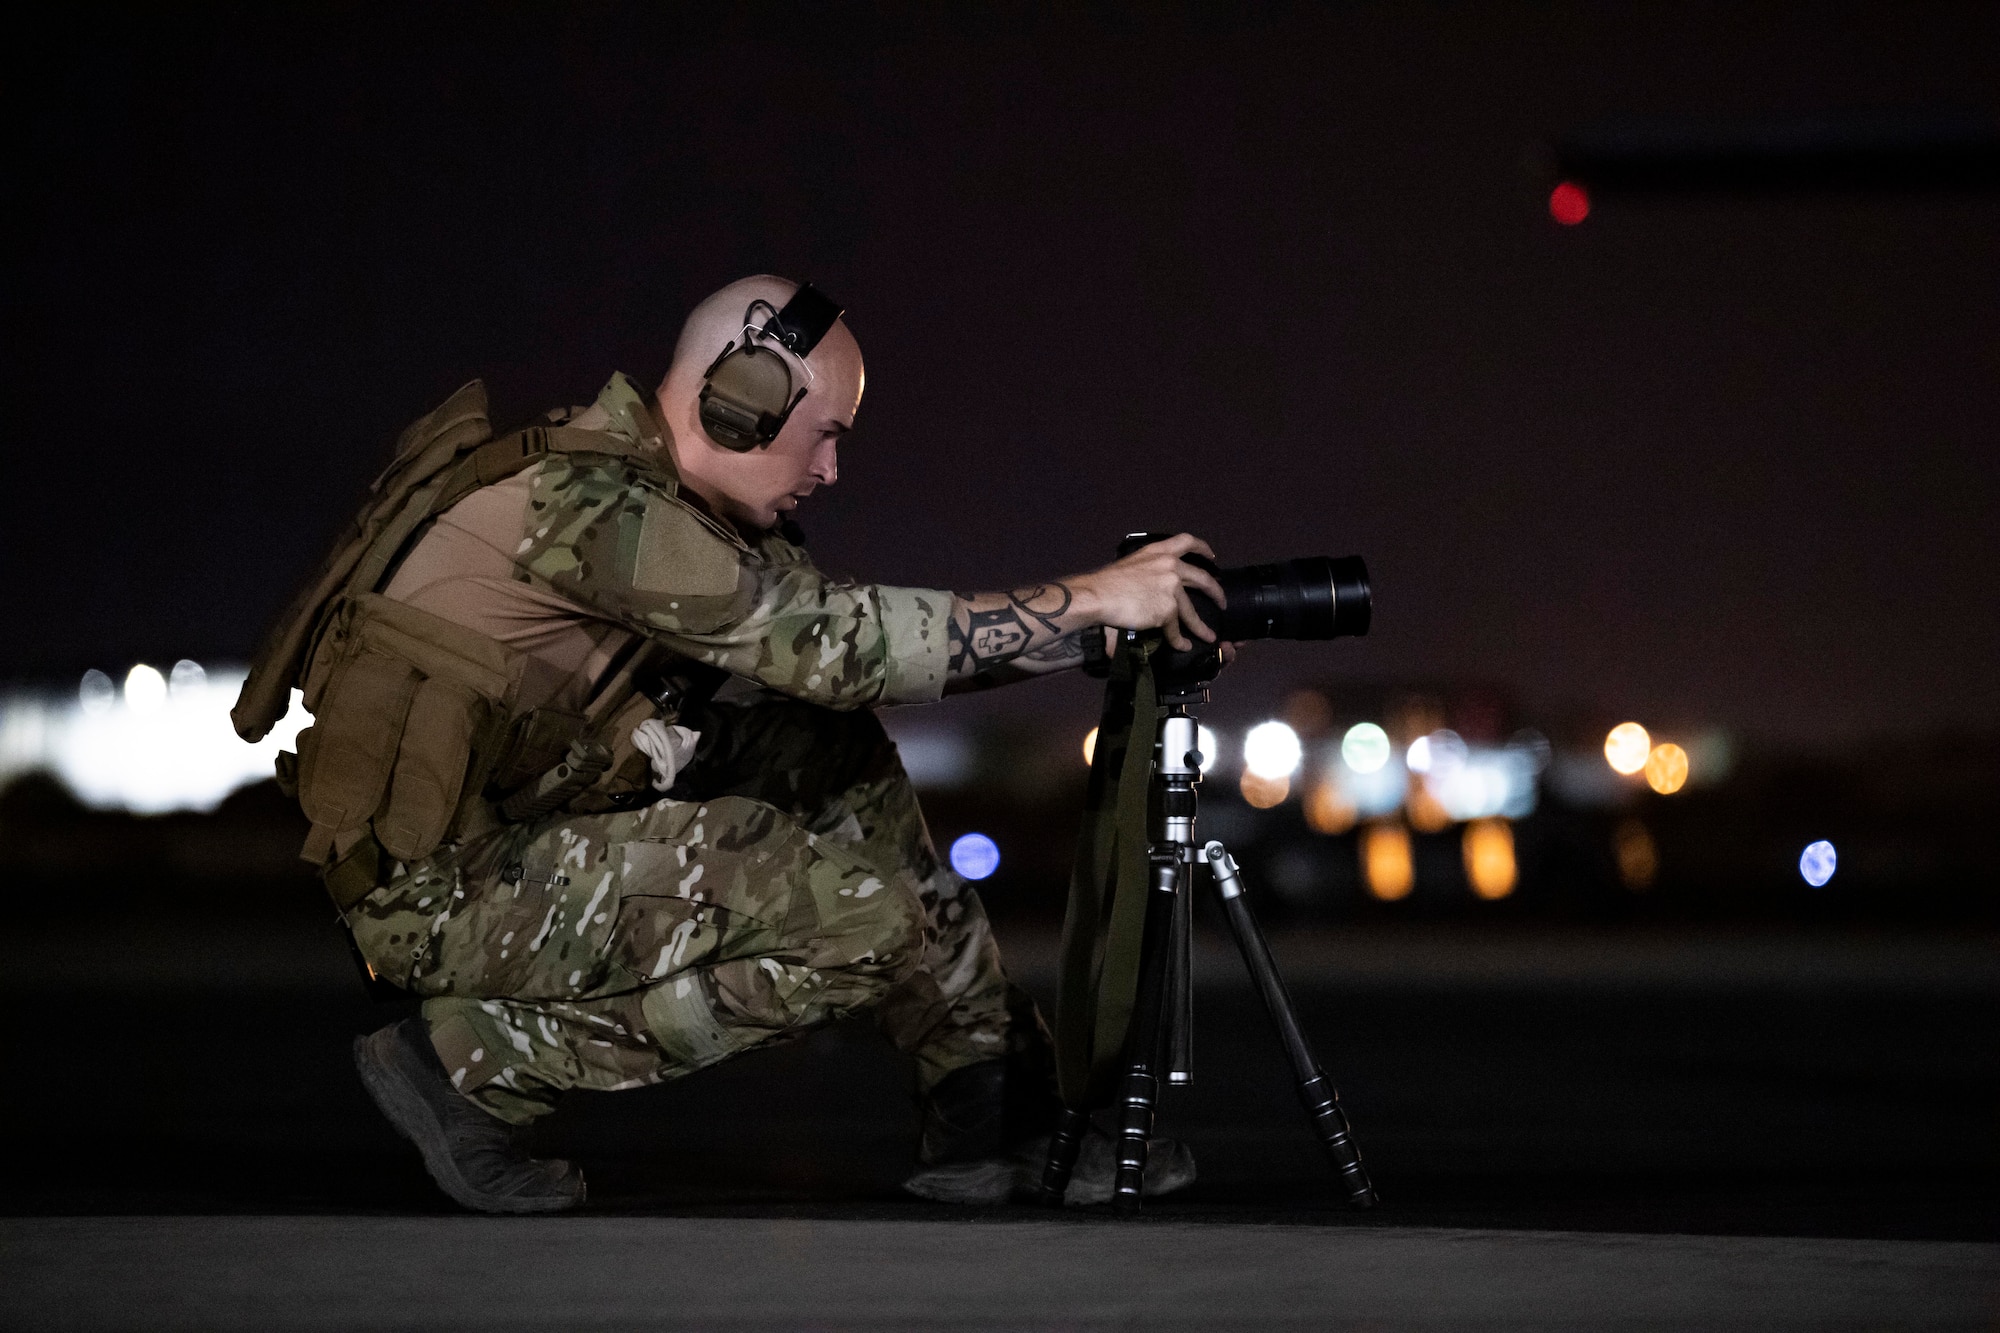 Muralist, painter, street artist and 315th Airlift Wing Reservist, Staff Sgt. Corban Lundborg, combat photojournalist with the 4th Combat Camera Squadron at JB Charleston, South Carolina, used his creative talent and public affairs training to win 2018 Military Photographer of the Year and first place in the 2018 Military Visual Awards portrait category.